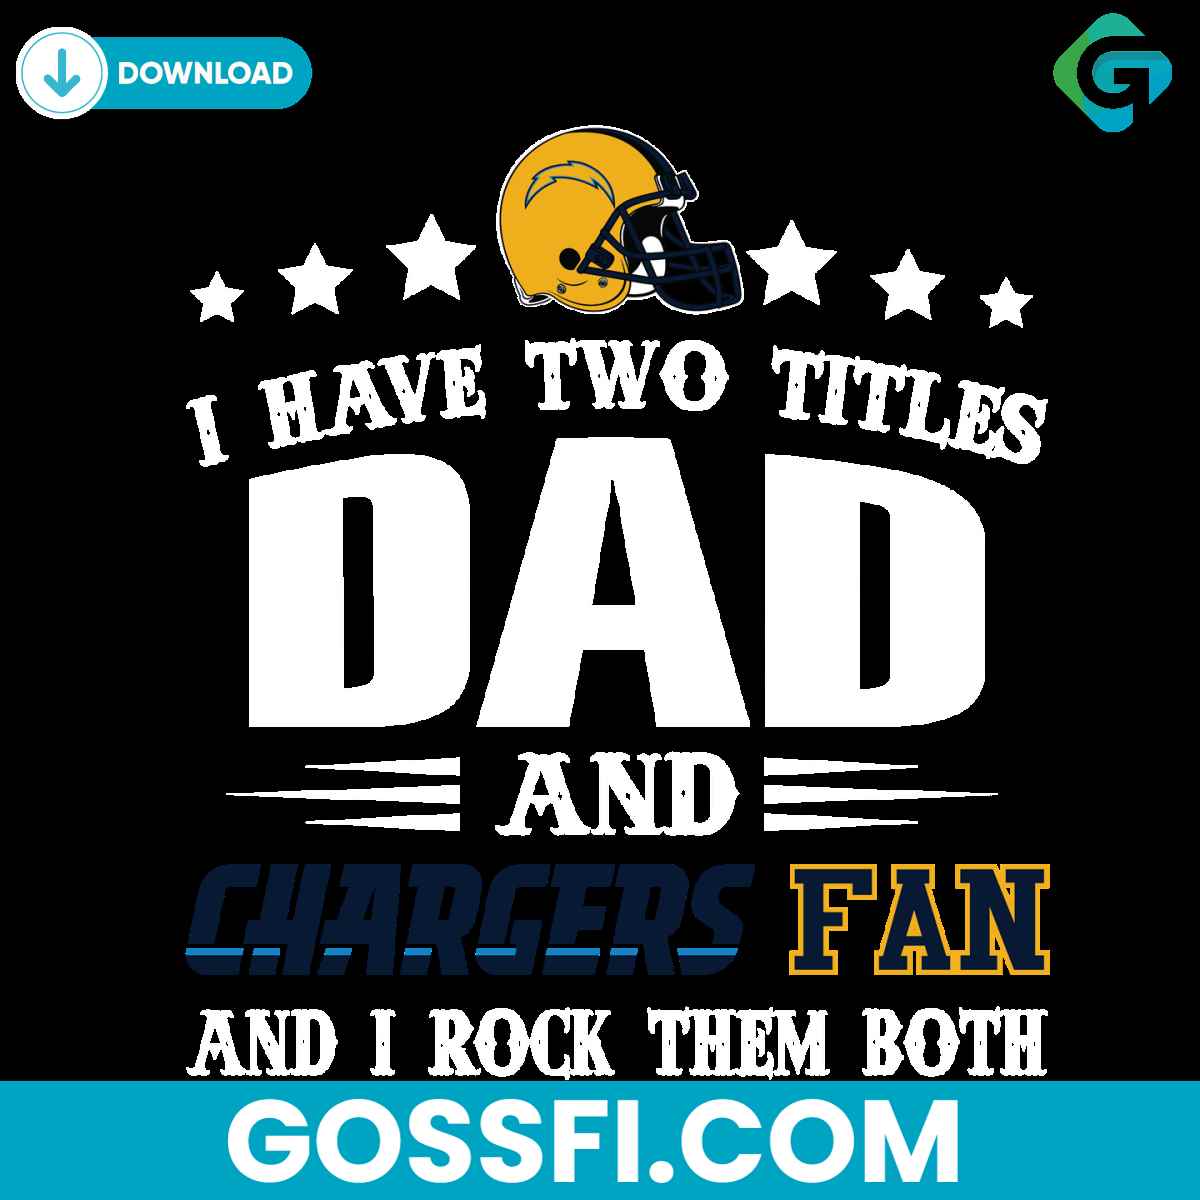 i-have-two-titles-dad-and-chargers-fan-svg-fathers-day-svg